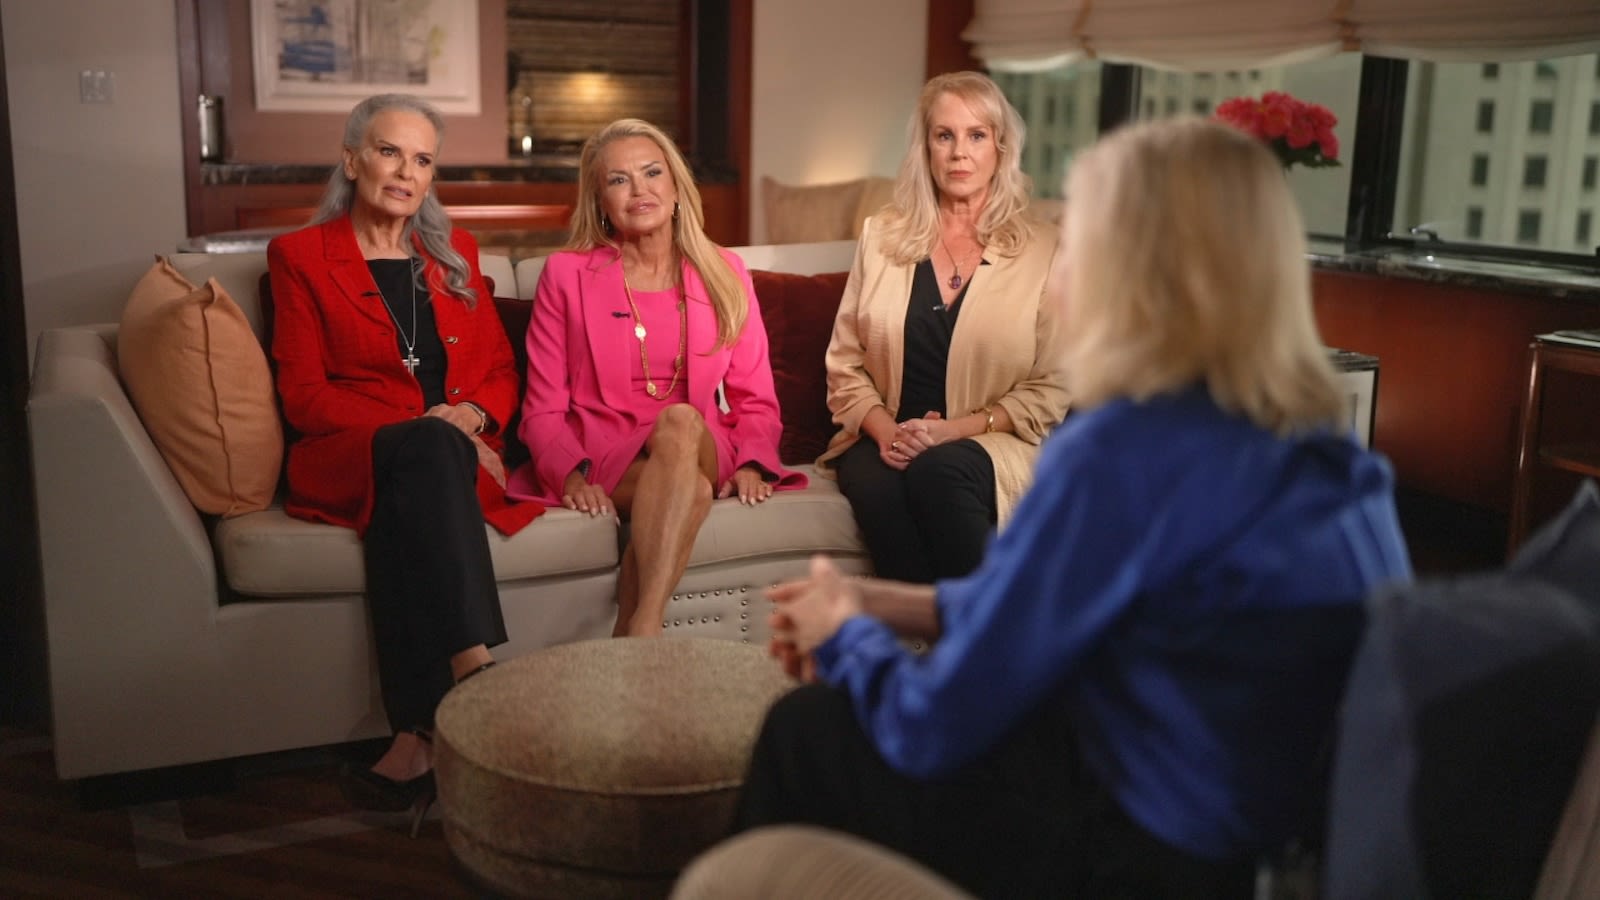 Nicole Brown Simpson's sisters recall shocking verdict: 'I couldn't scream, I was just numb'